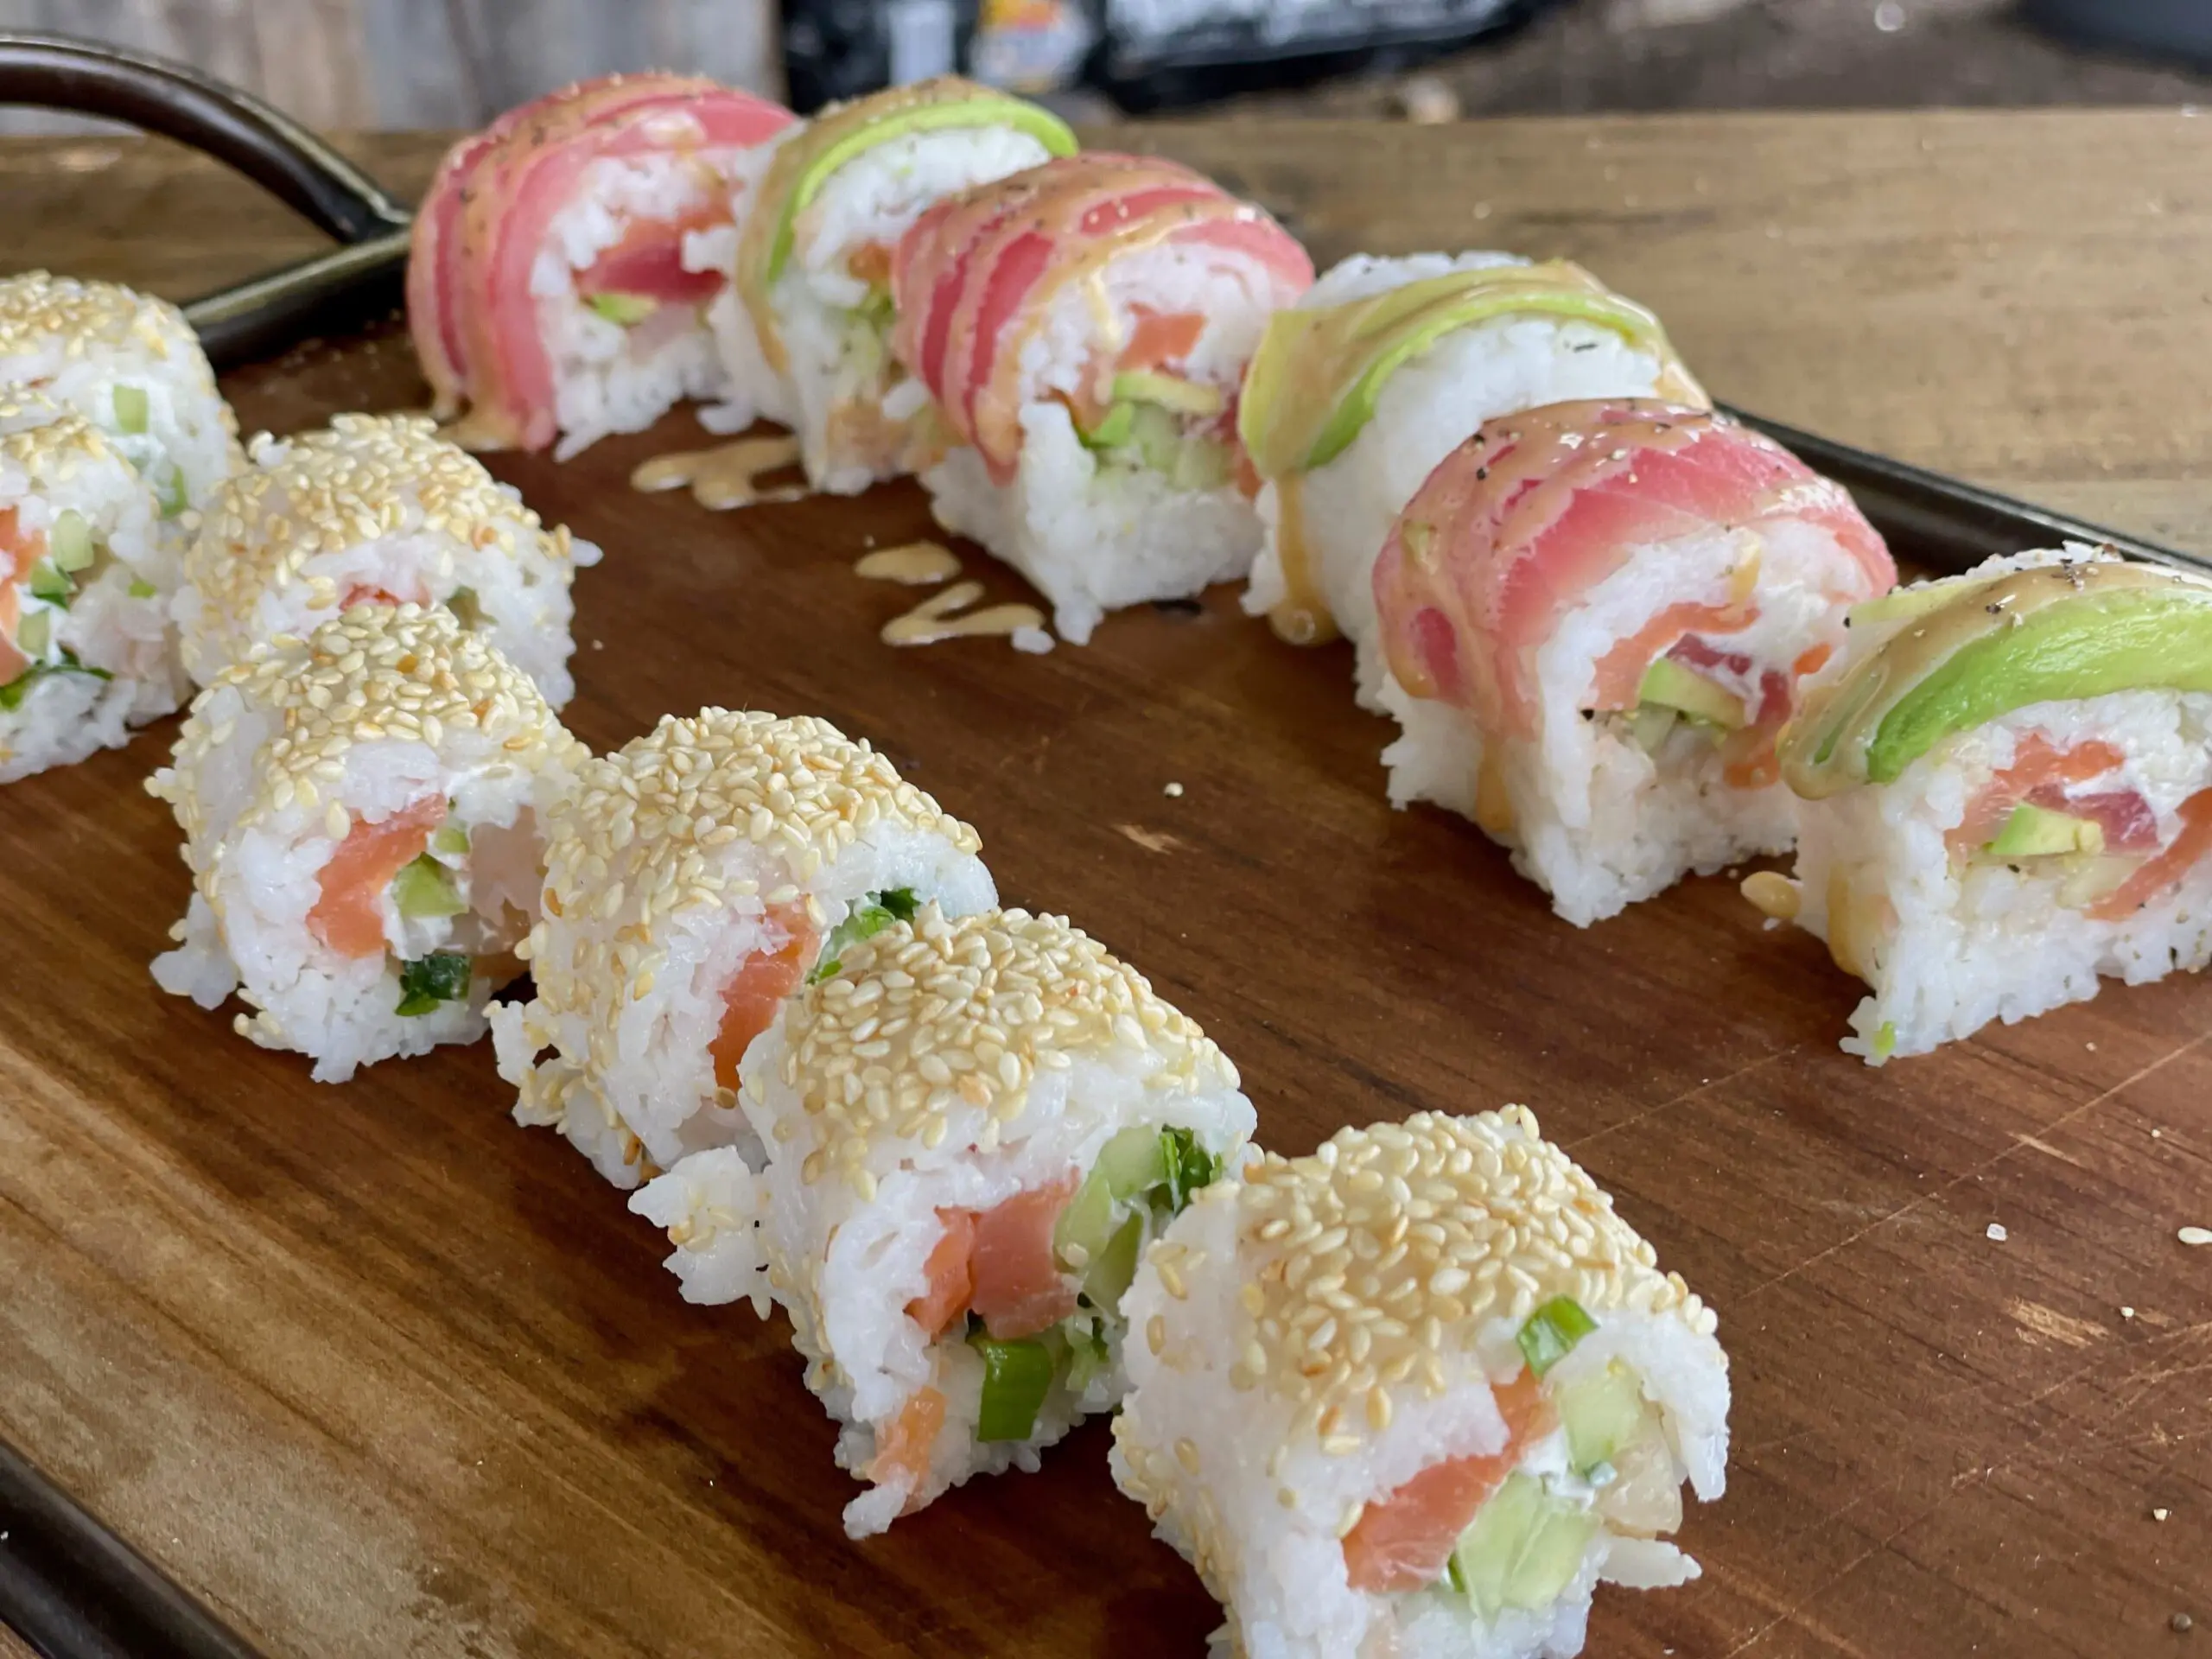 Best Sushi-Making Kits: Top 7 Sets For Homemade Rolls Most